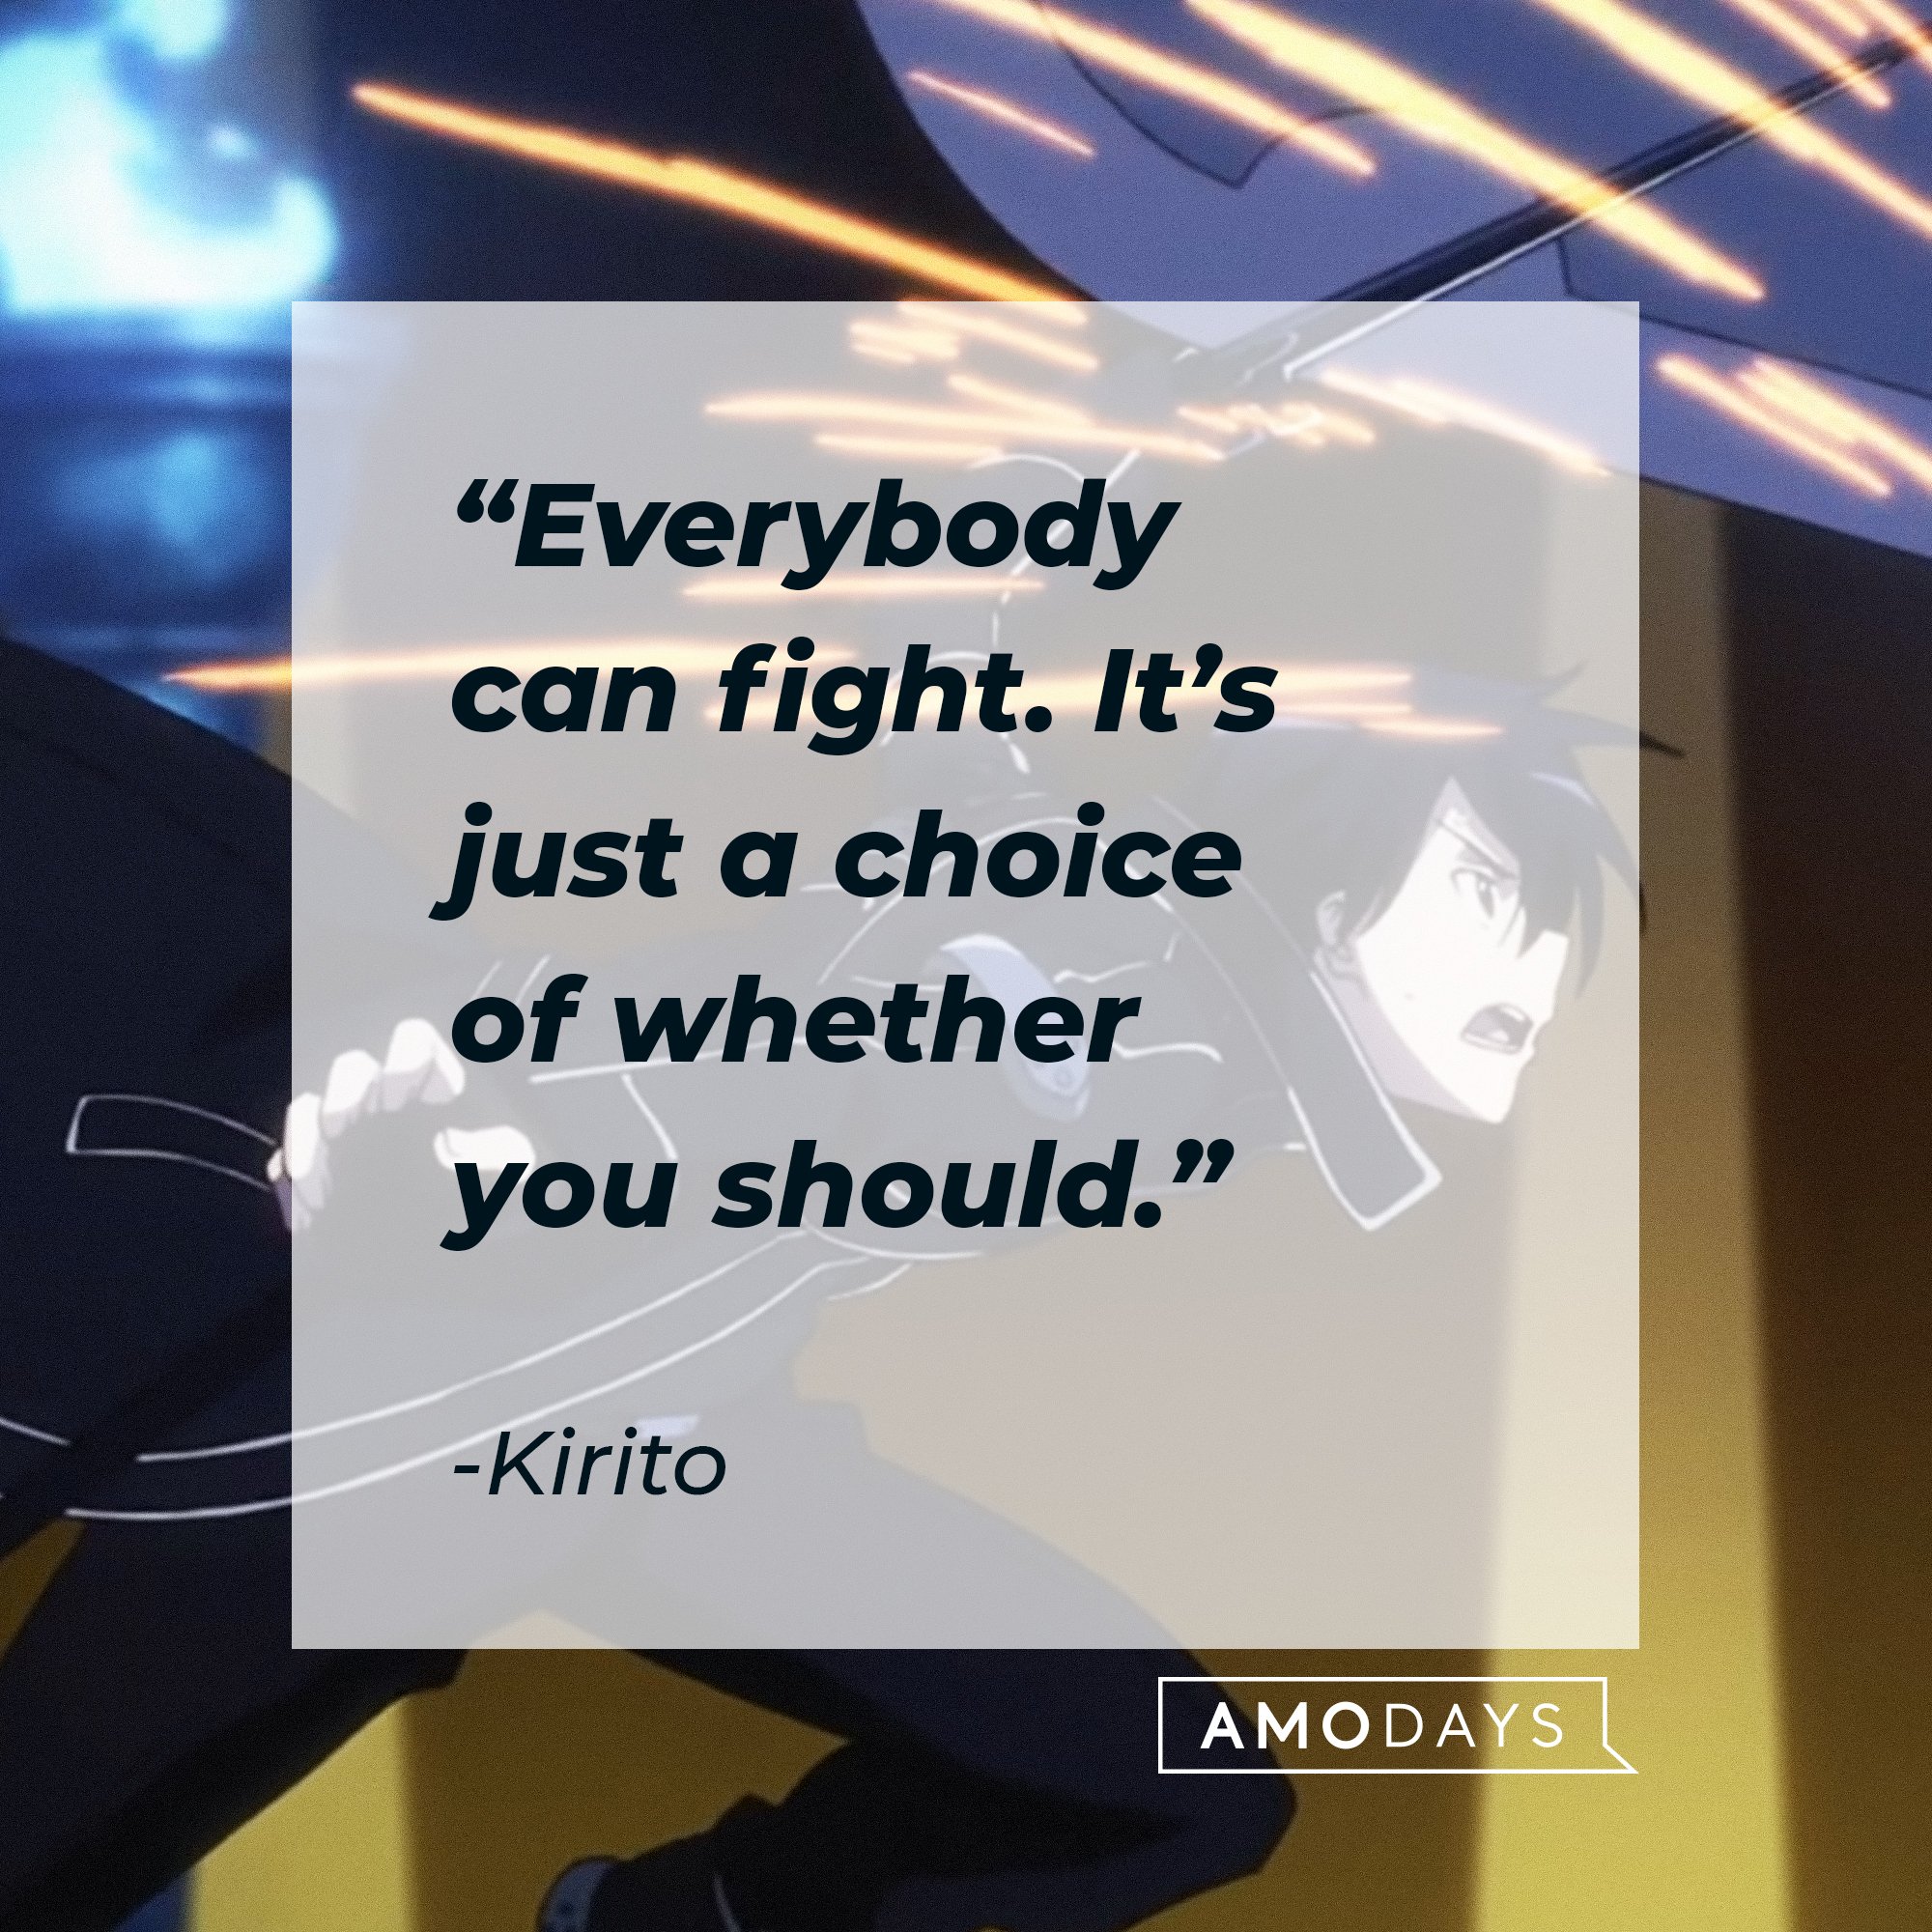 Kirito’s quote: “Everybody can fight. It’s just a choice of whether you should.” |  Image: AmoDays